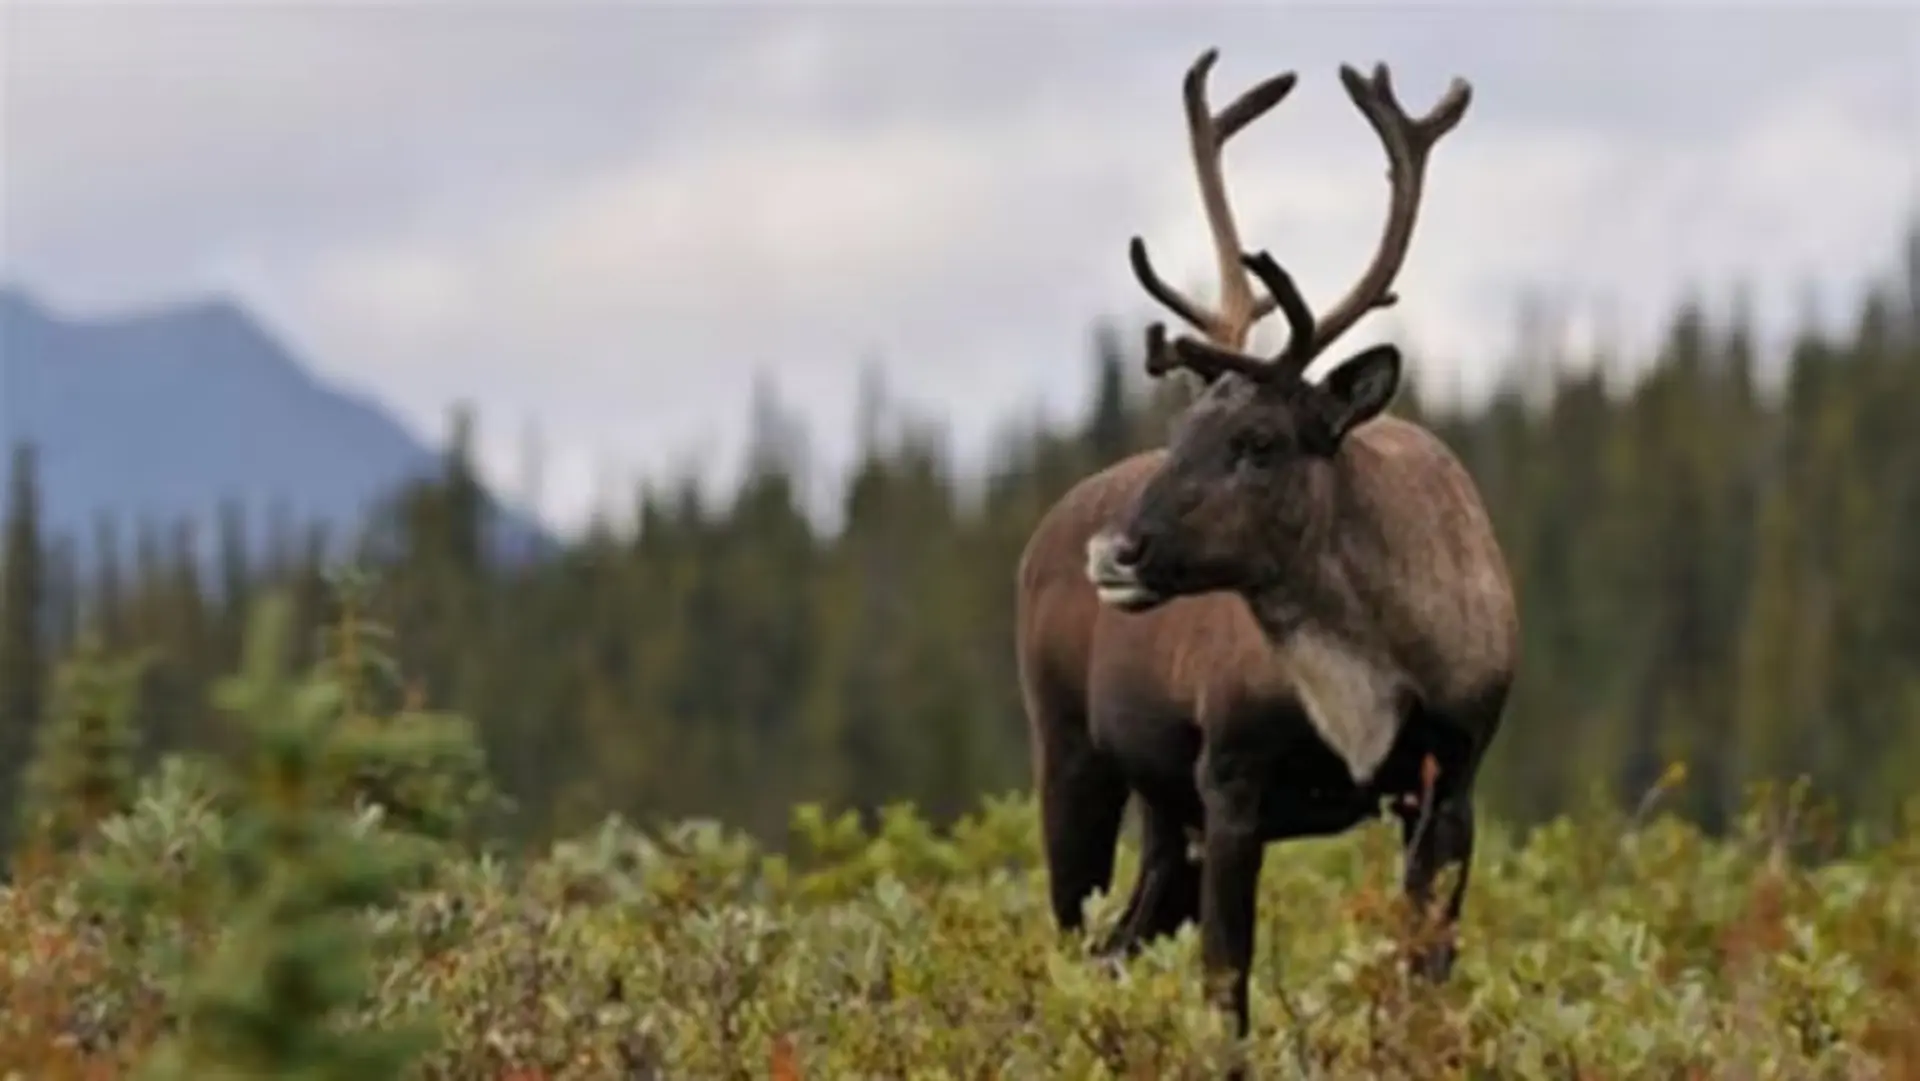 Caribou recovery program at Jasper National Park aims to boost herd numbers